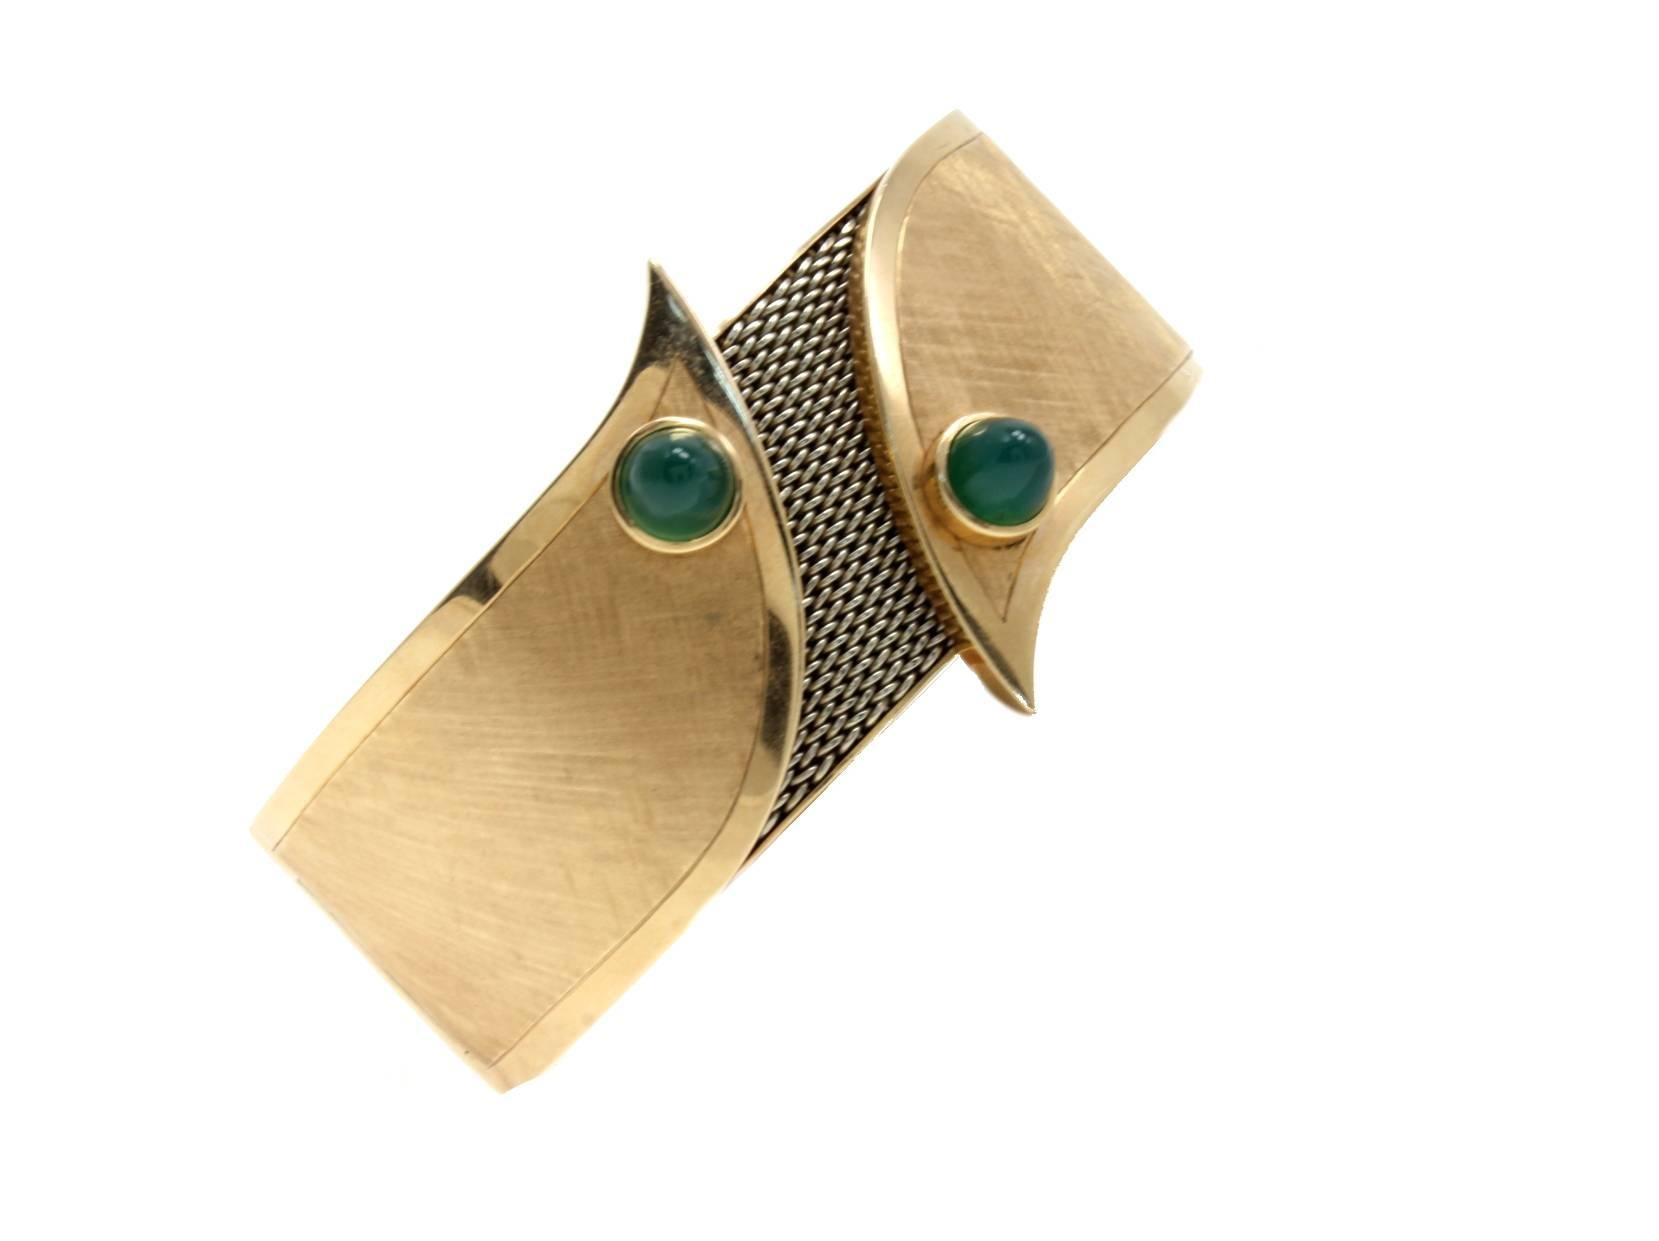 Cuff bracelet in 14kt yellow gold with 2 emeralds at the far end of it.

emeralds 3.76kt
tot weight 60.4gr
r.f.  faar